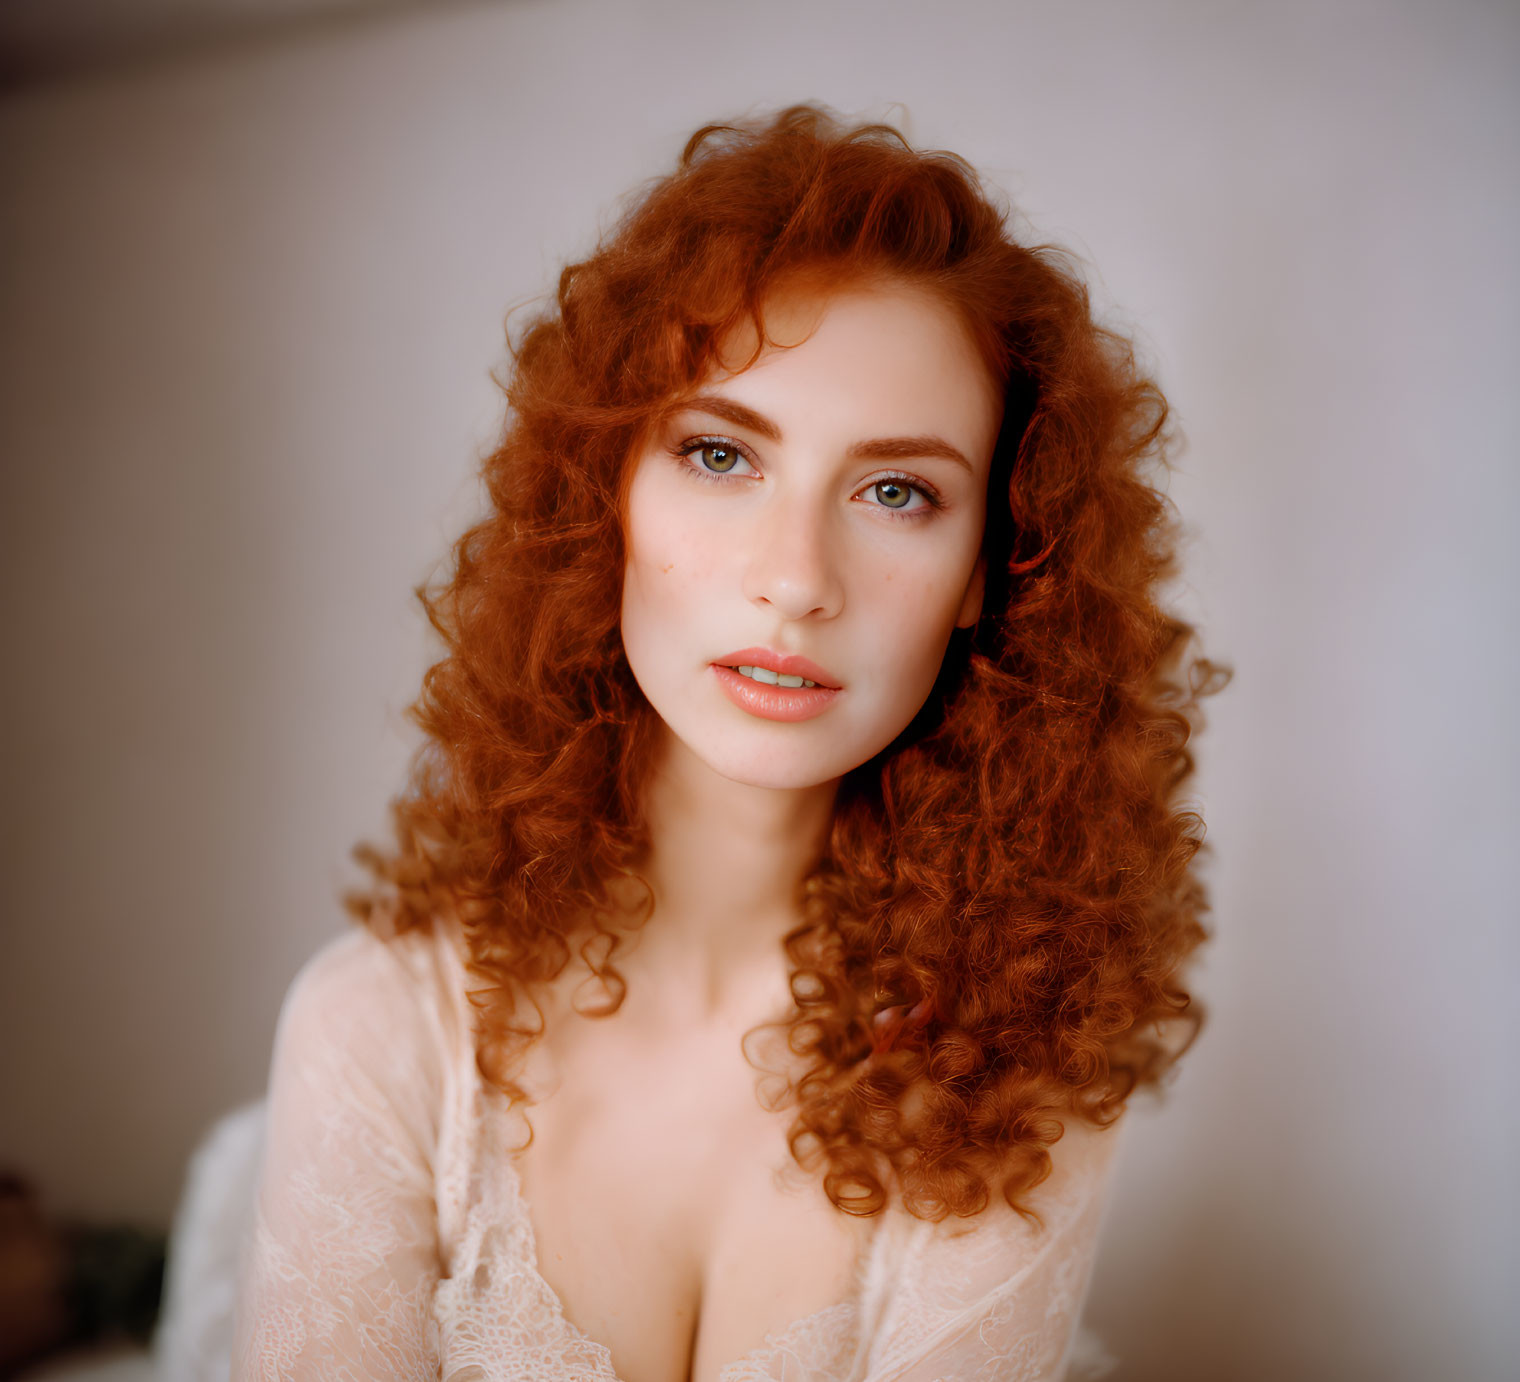 Portrait of woman with curly red hair and lace garment